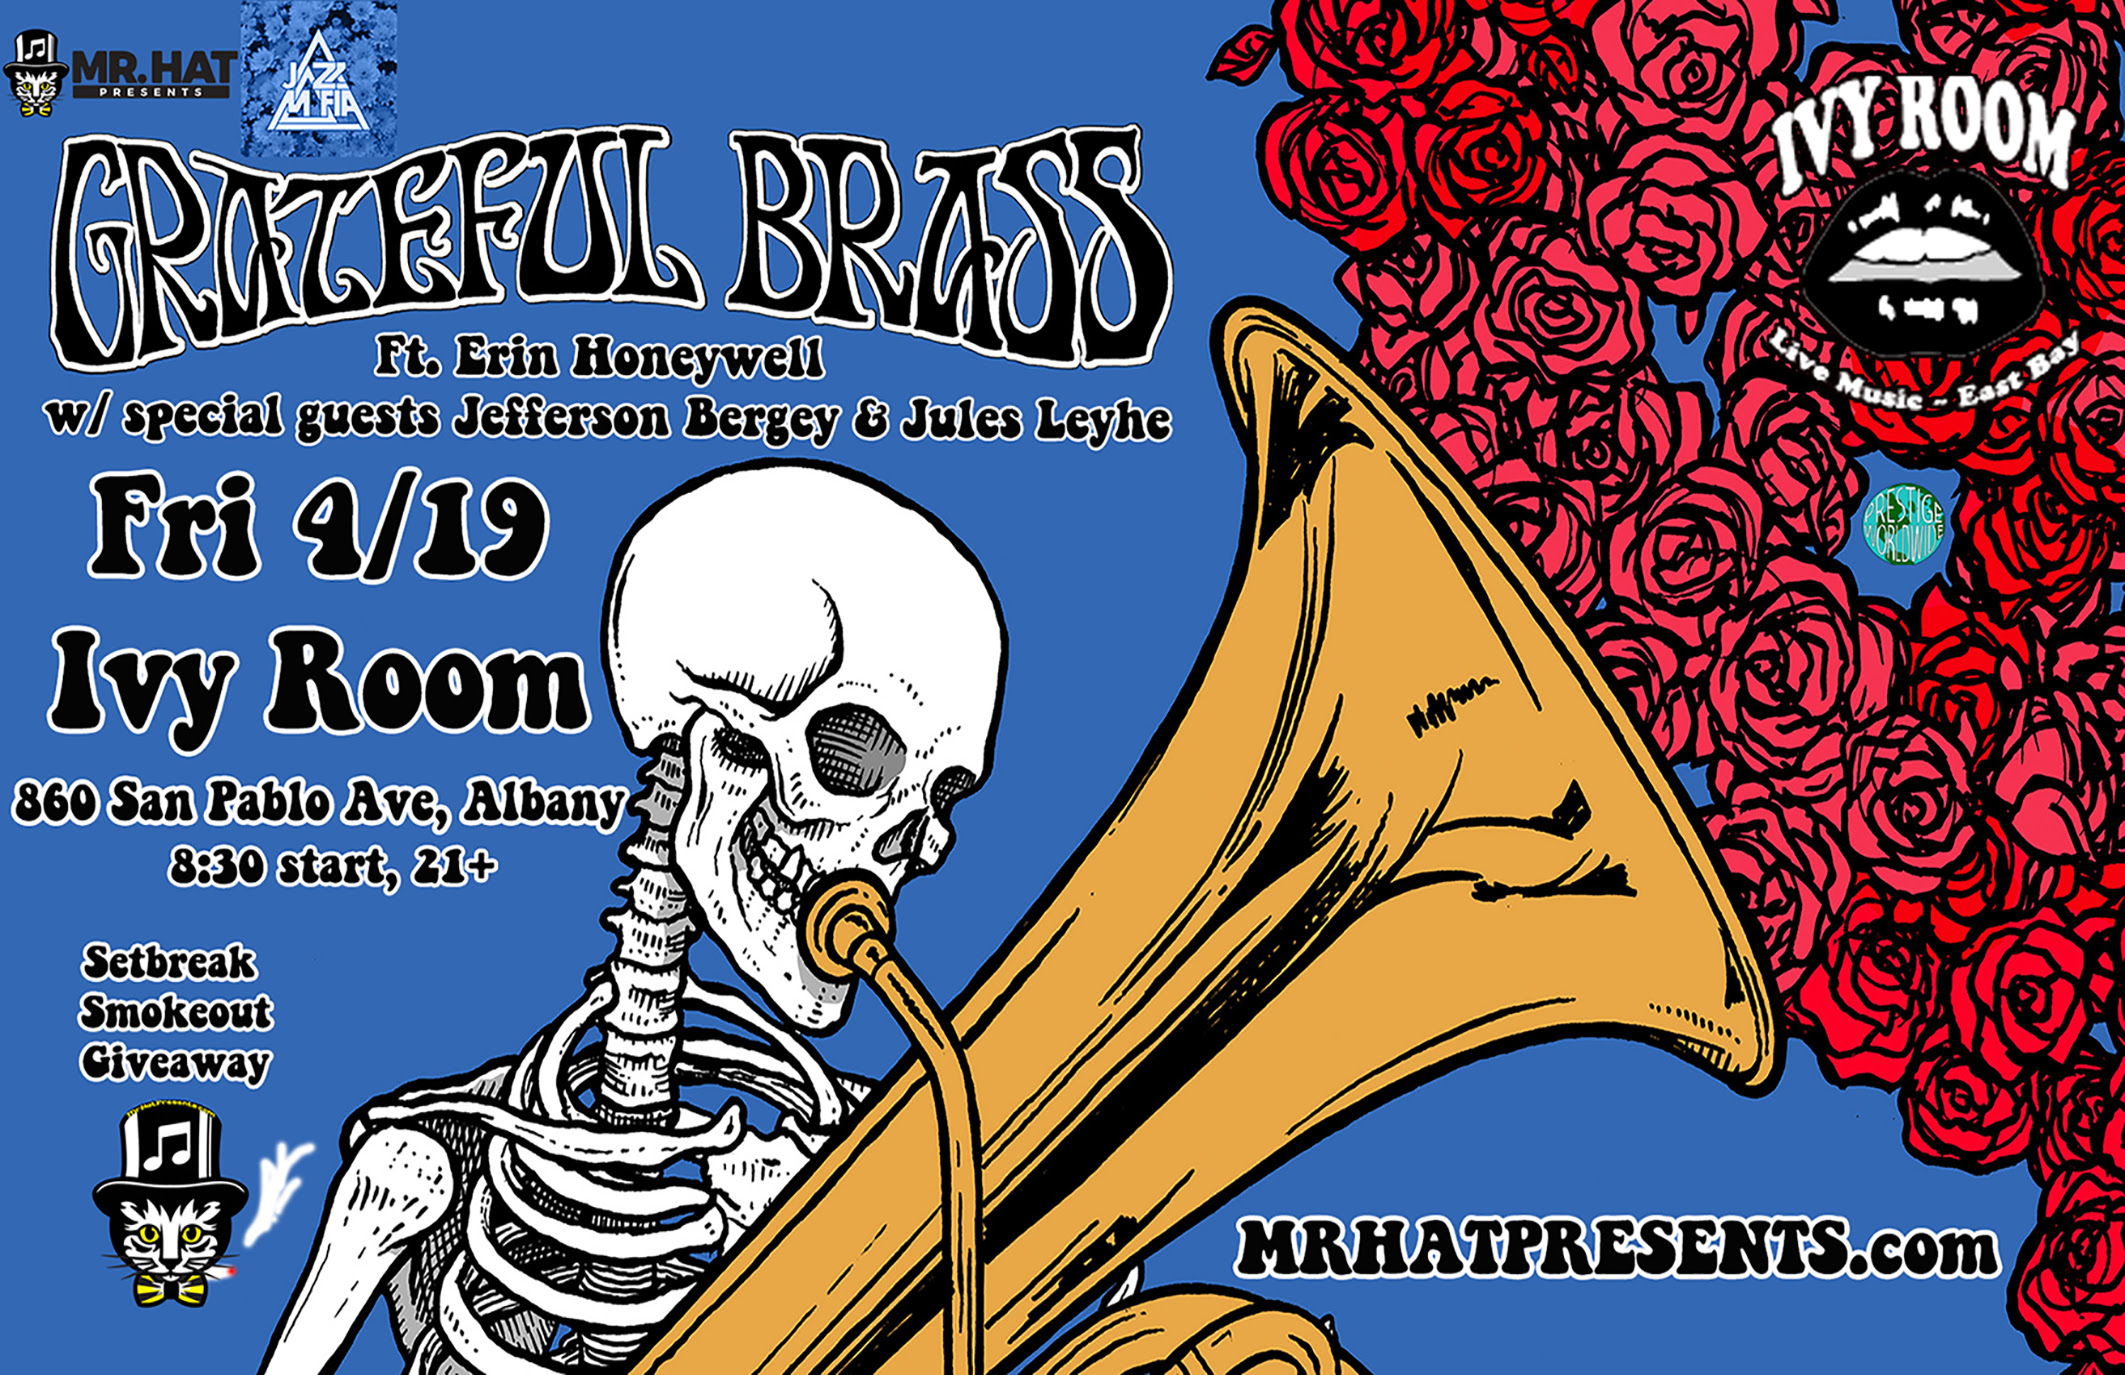 A Fusion of Brass and Dead: Grateful Brass Featuring Jefferson Bergey & Jules Leyhe at the Ivy Room